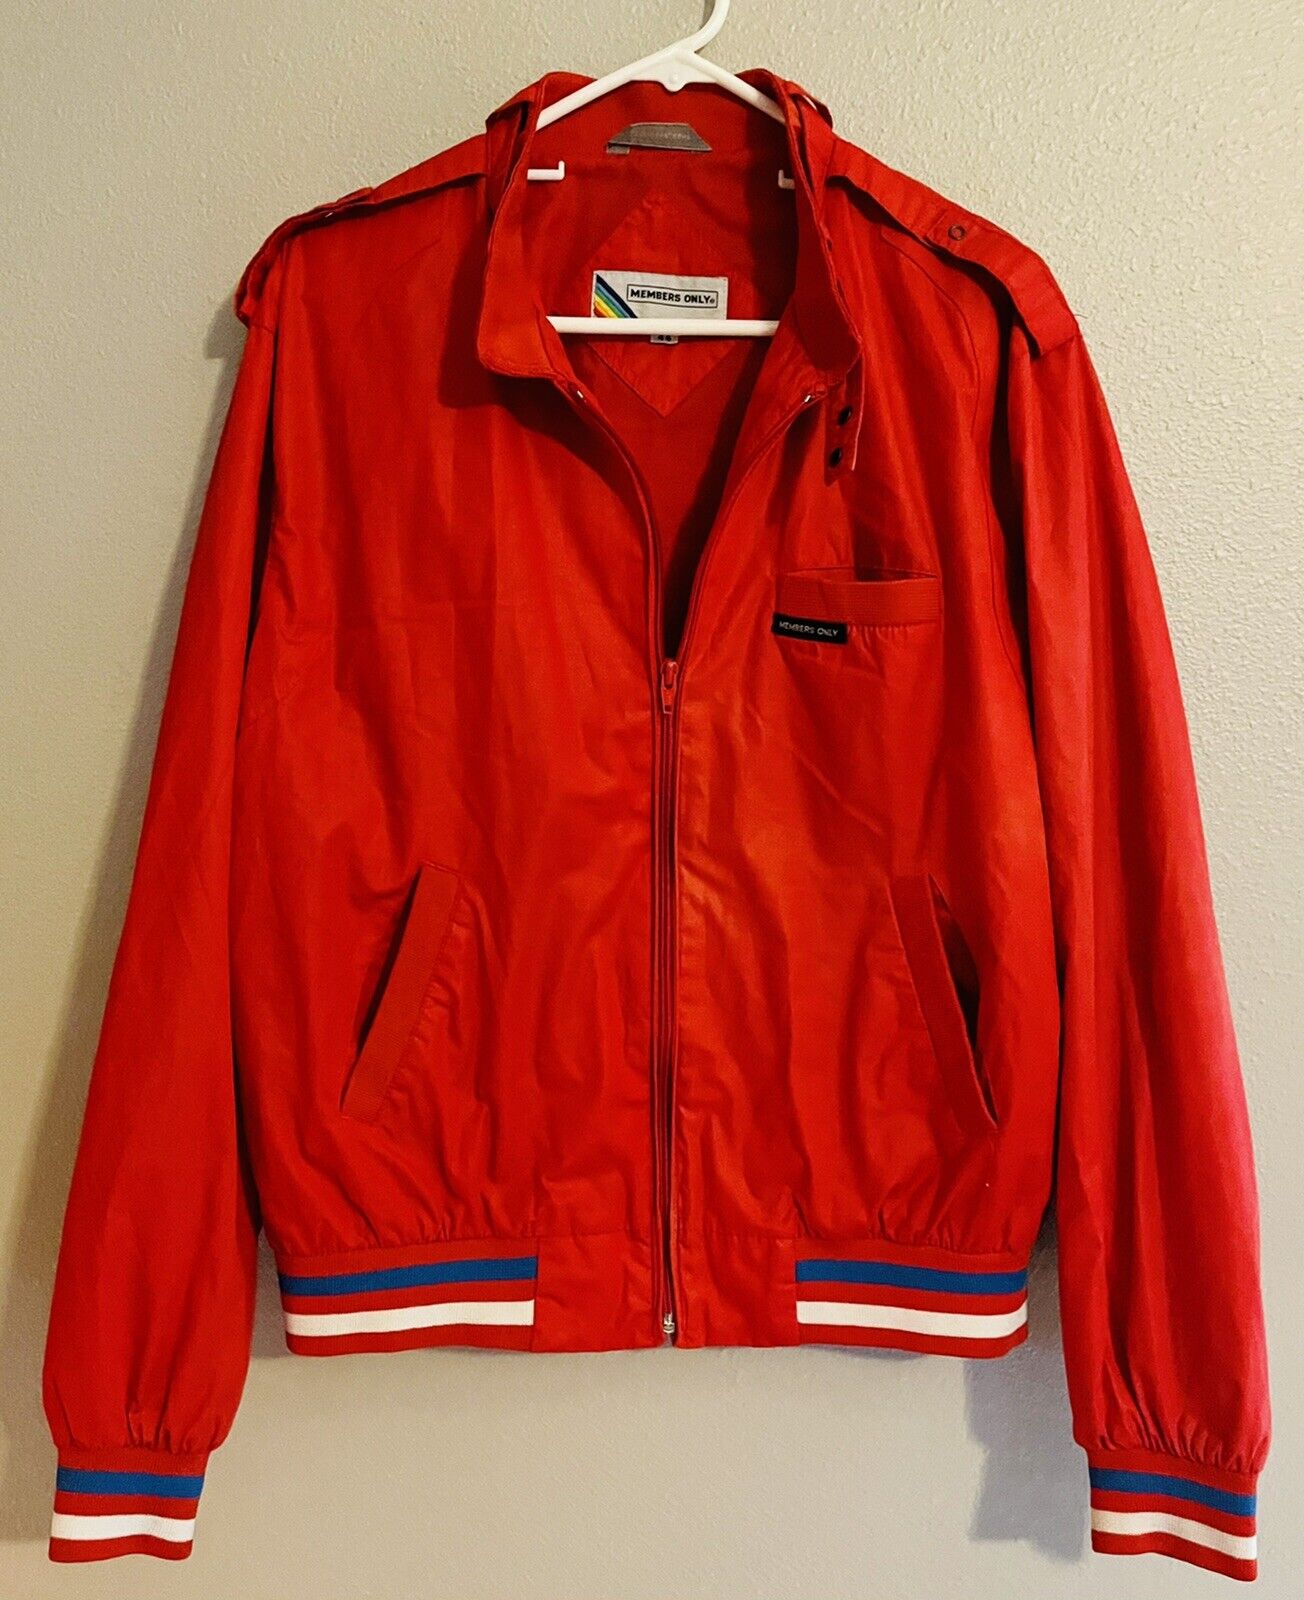 Rare Red Members Only Jacket Vintage Full Zip Size 44… - Gem